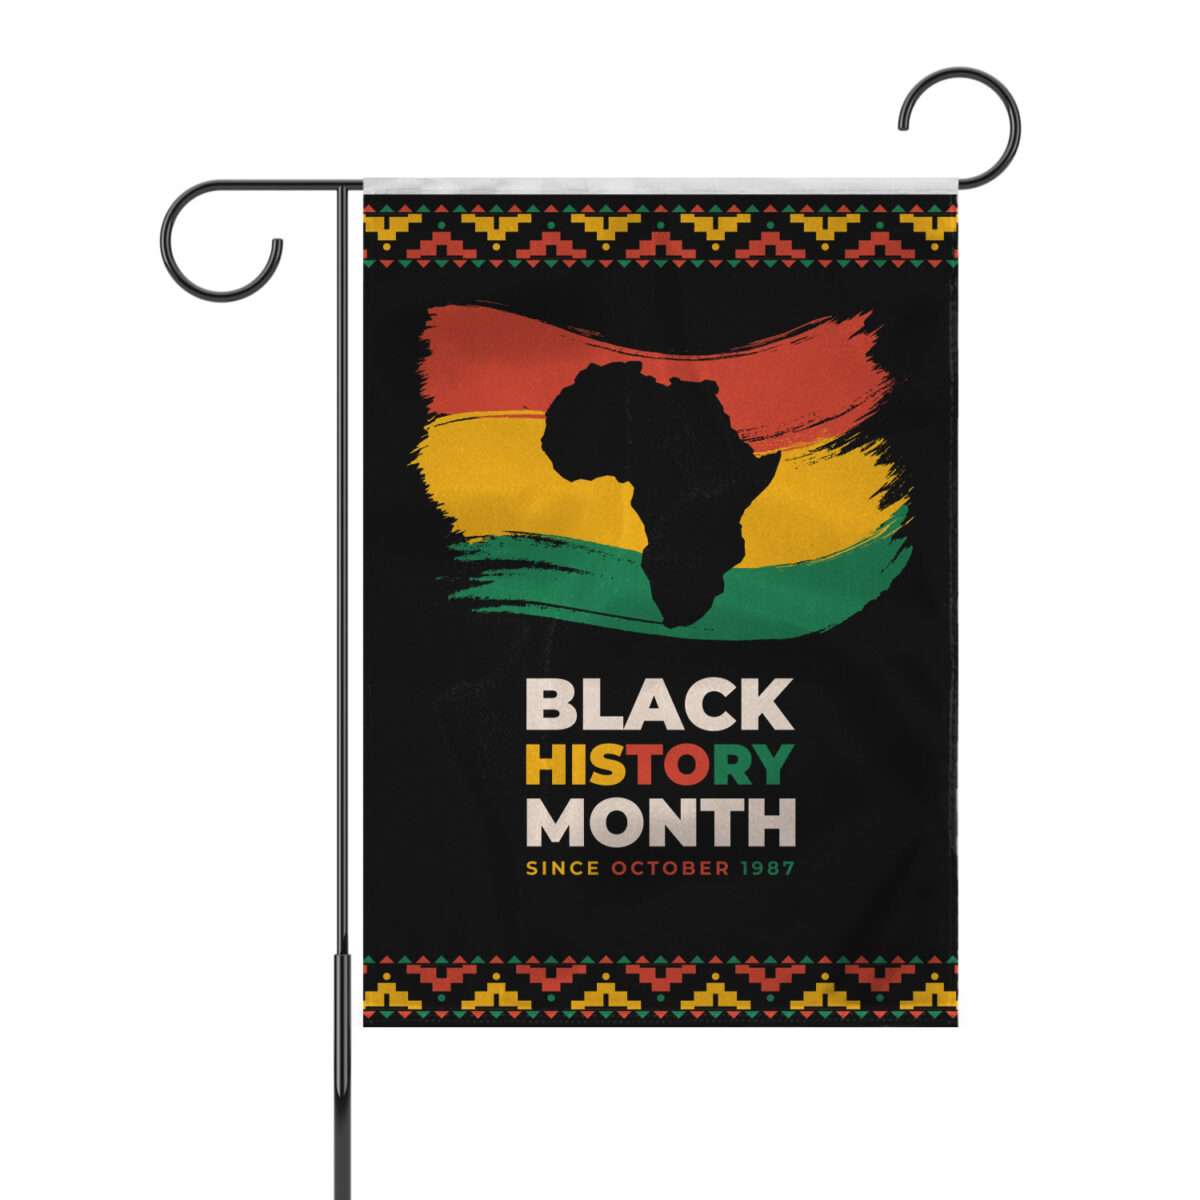 AGAS Black History Month Afro House Flag, 12"x18" Inch